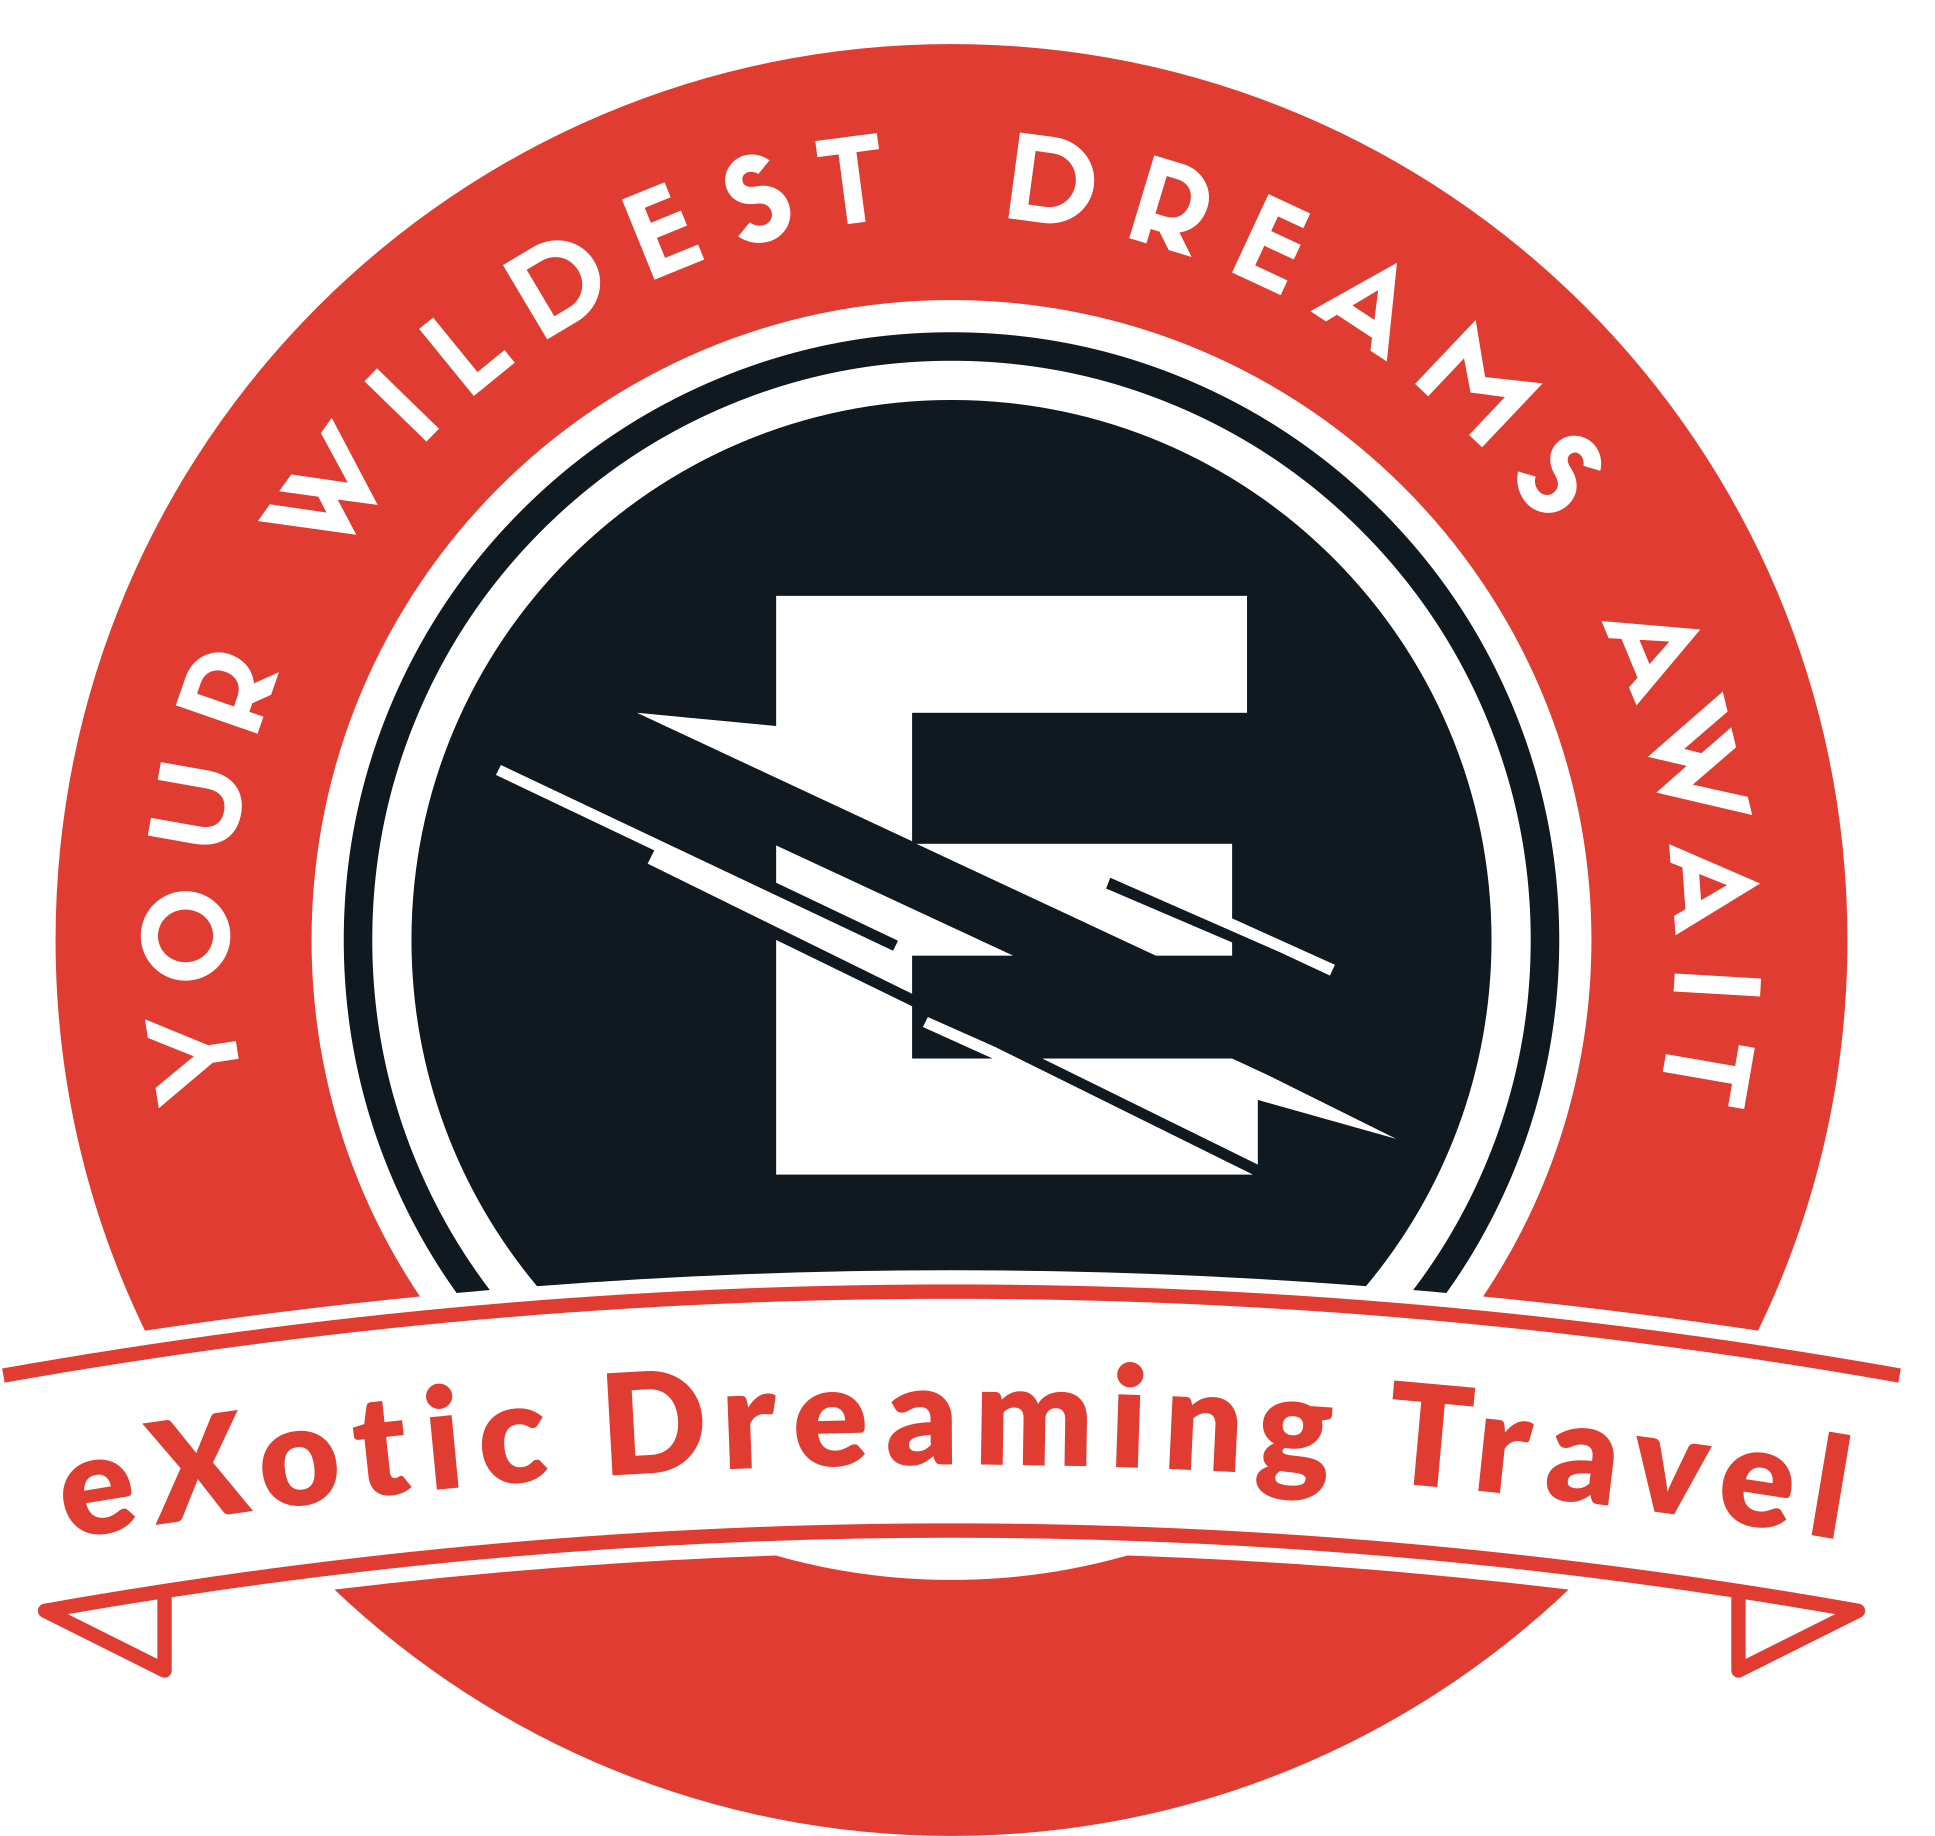 eXotic Dreaming Travel